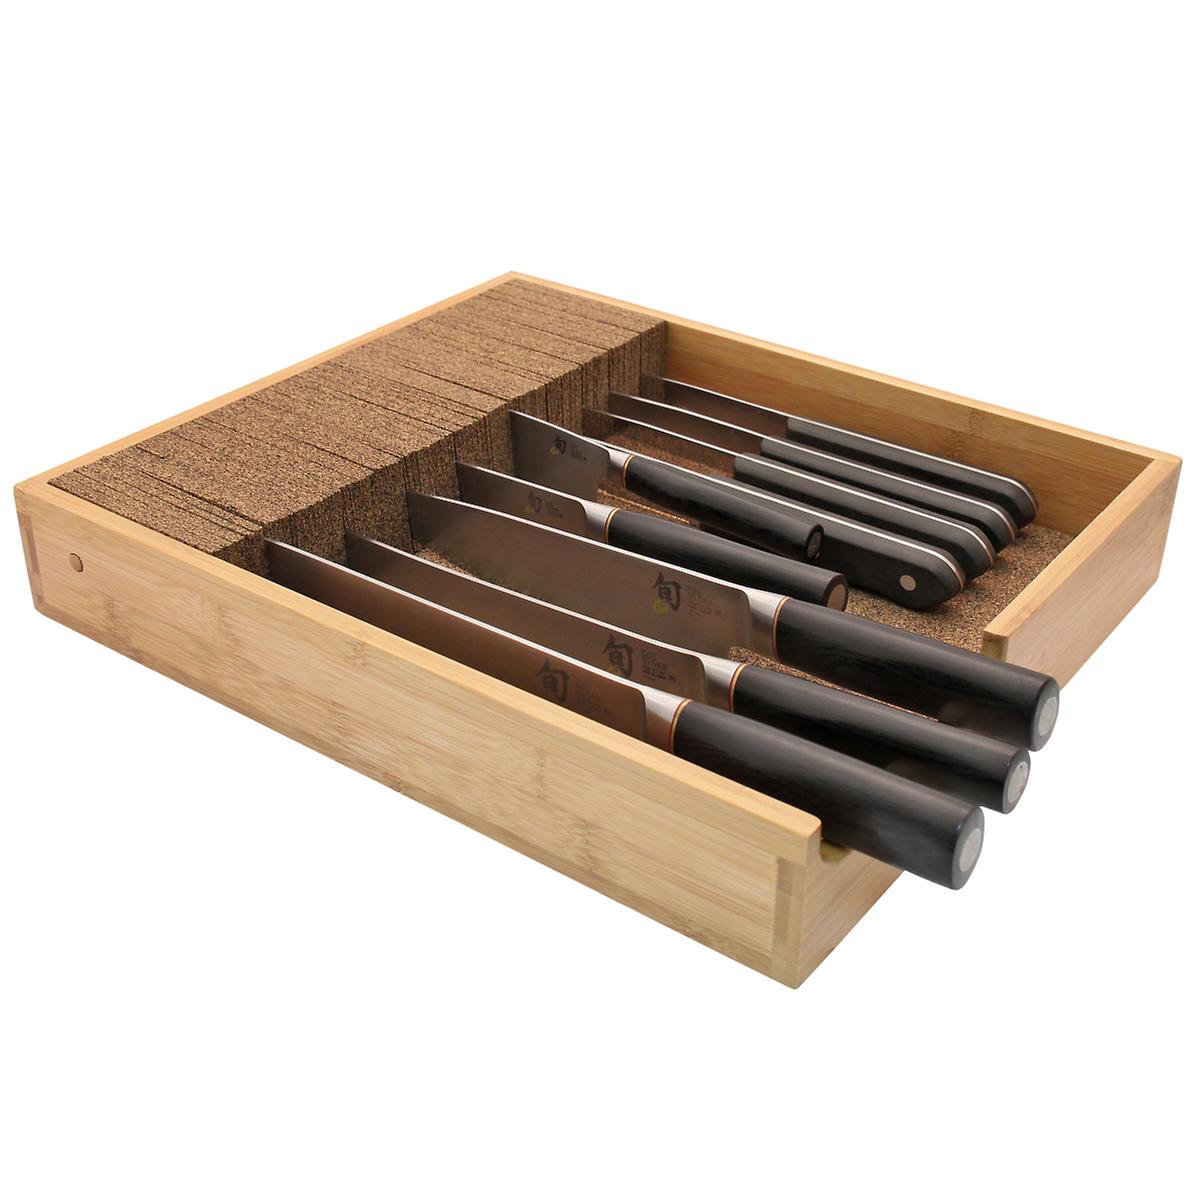 Bamboo InDrawer KnifeDock The Container Store